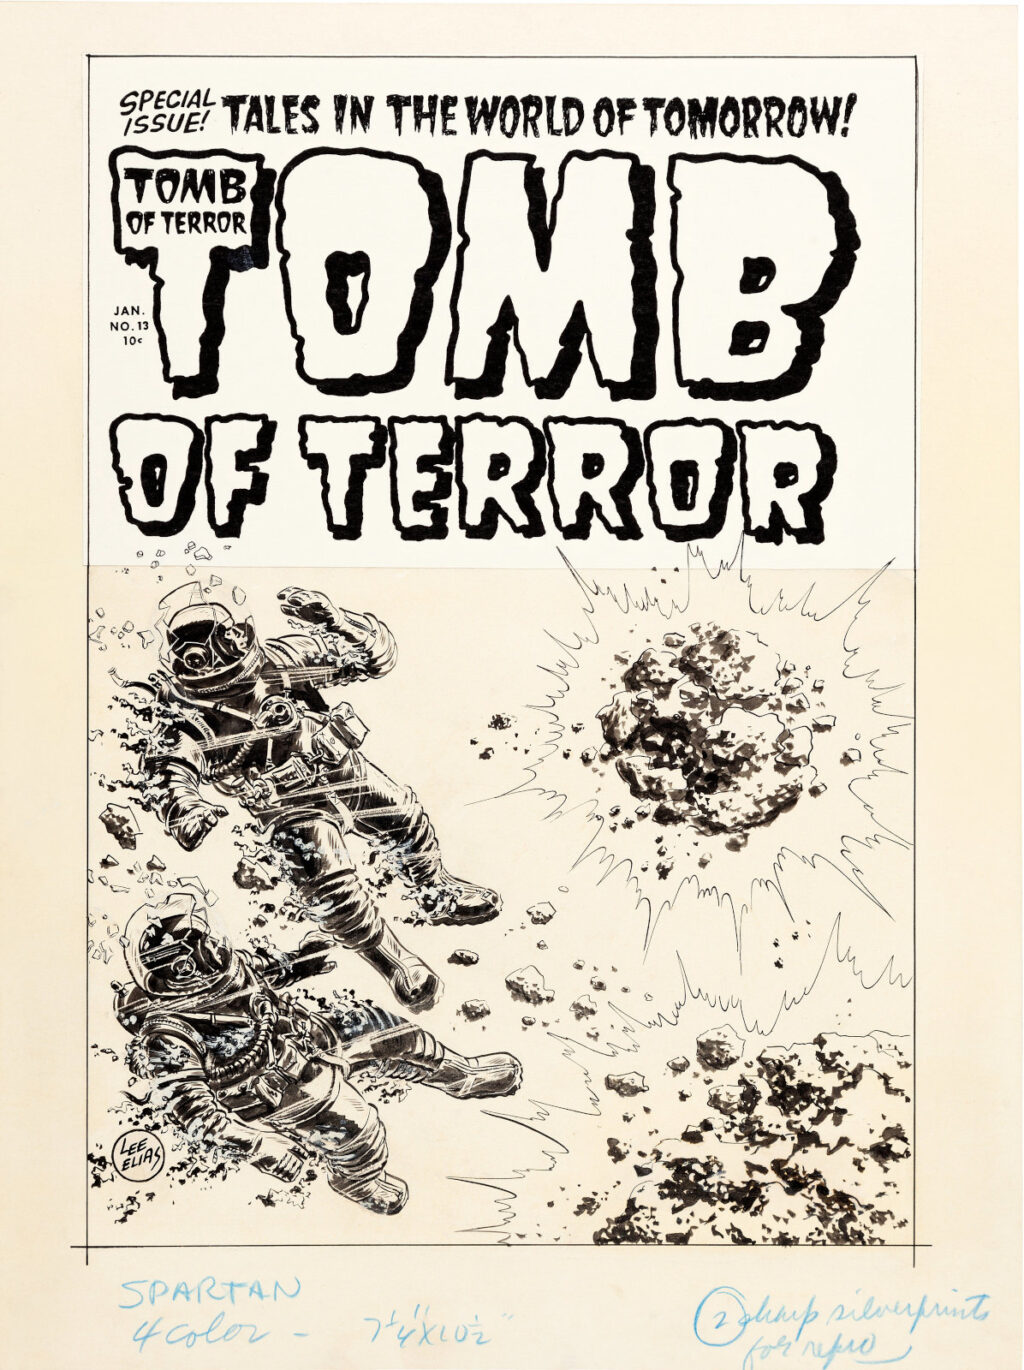 Tomb of Terror issue 13 cover by Lee Elias